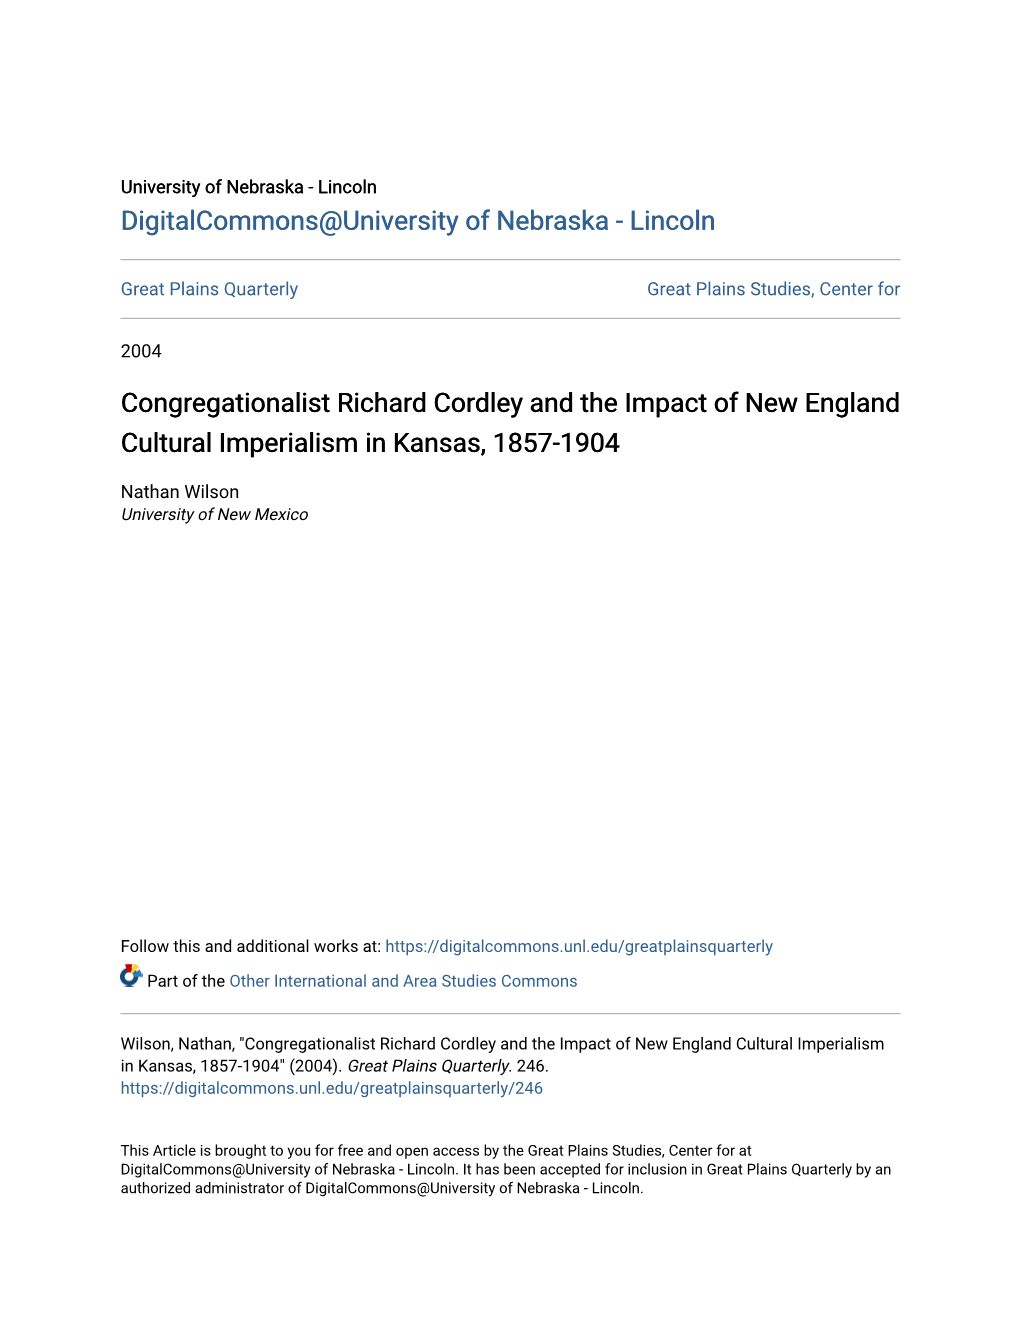 Congregationalist Richard Cordley and the Impact of New England Cultural Imperialism in Kansas, 1857-1904